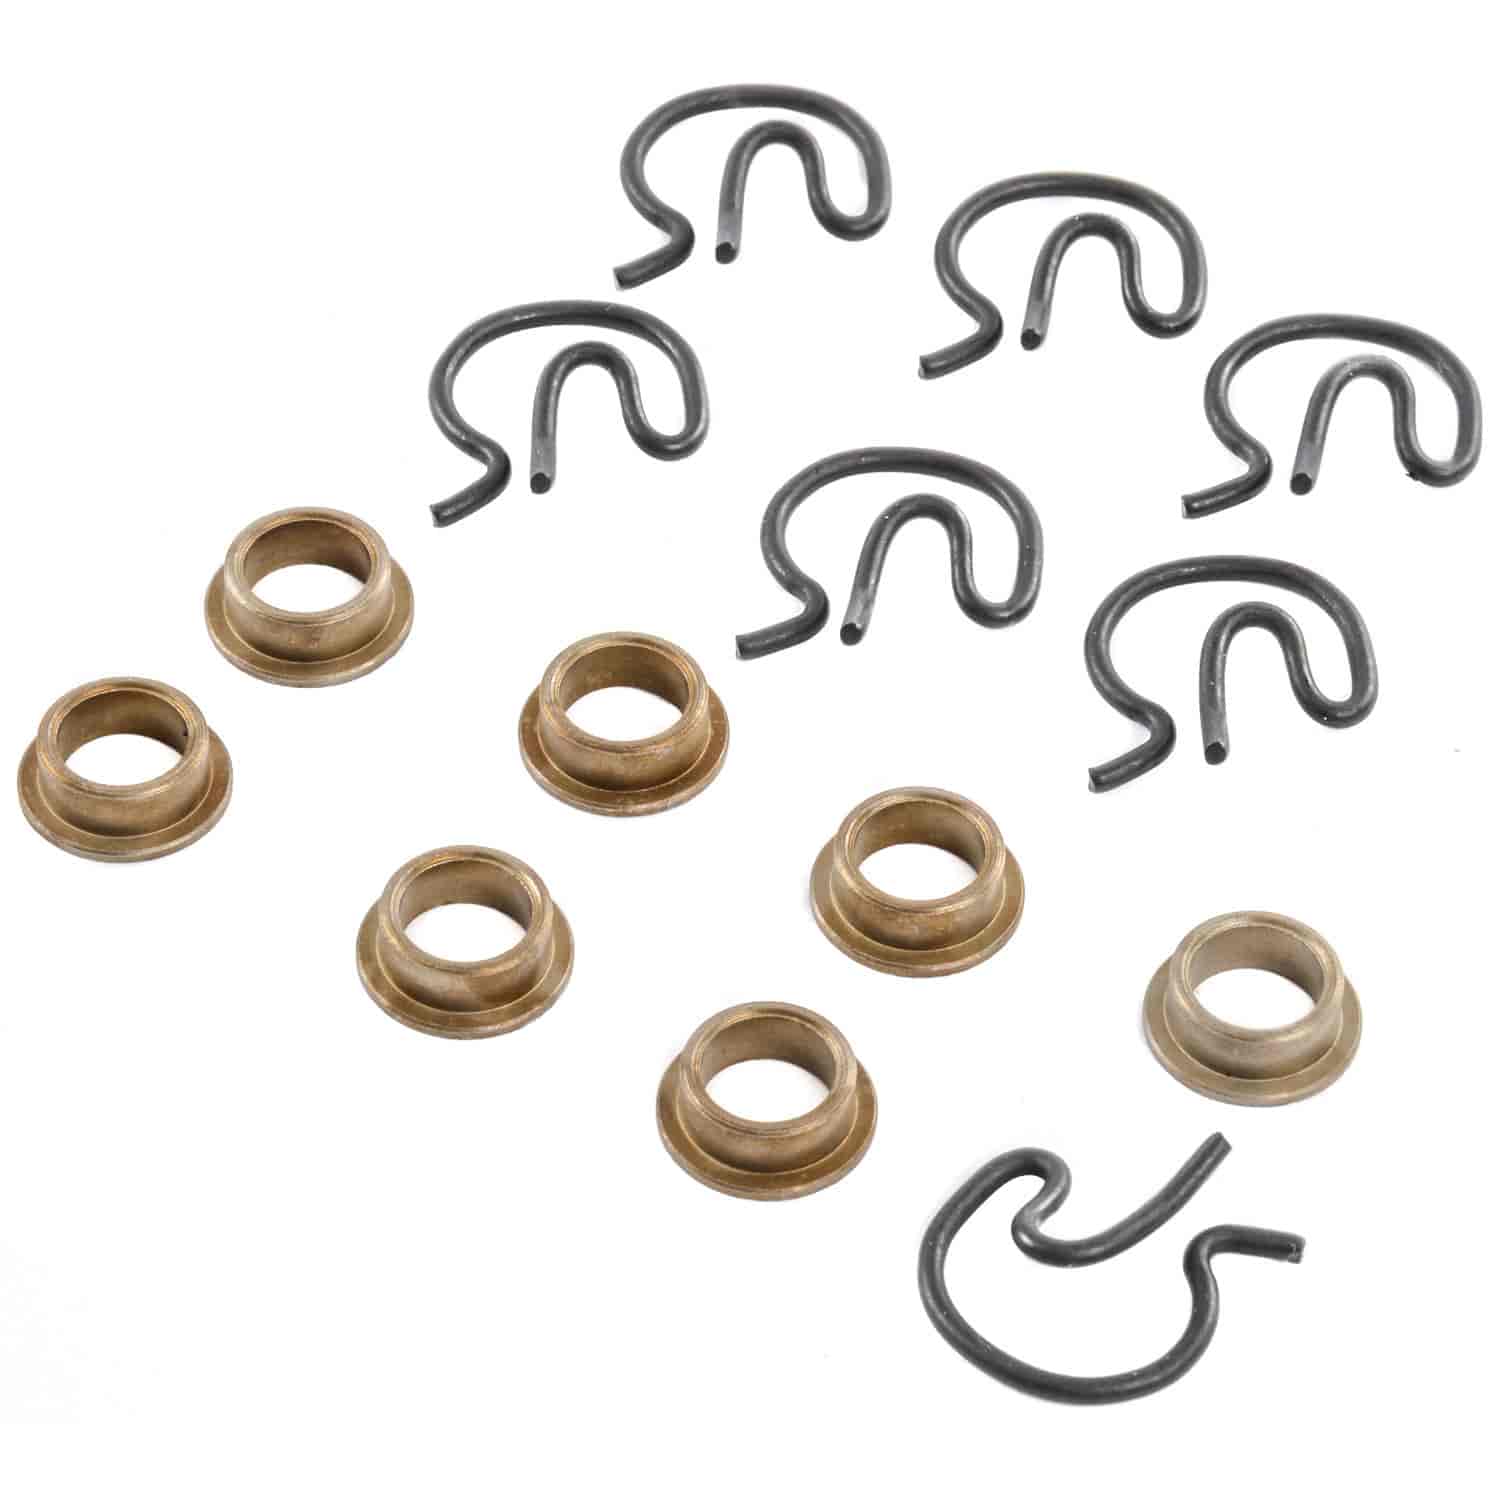 Steel Bushings and Spring Clips 3, 4, &